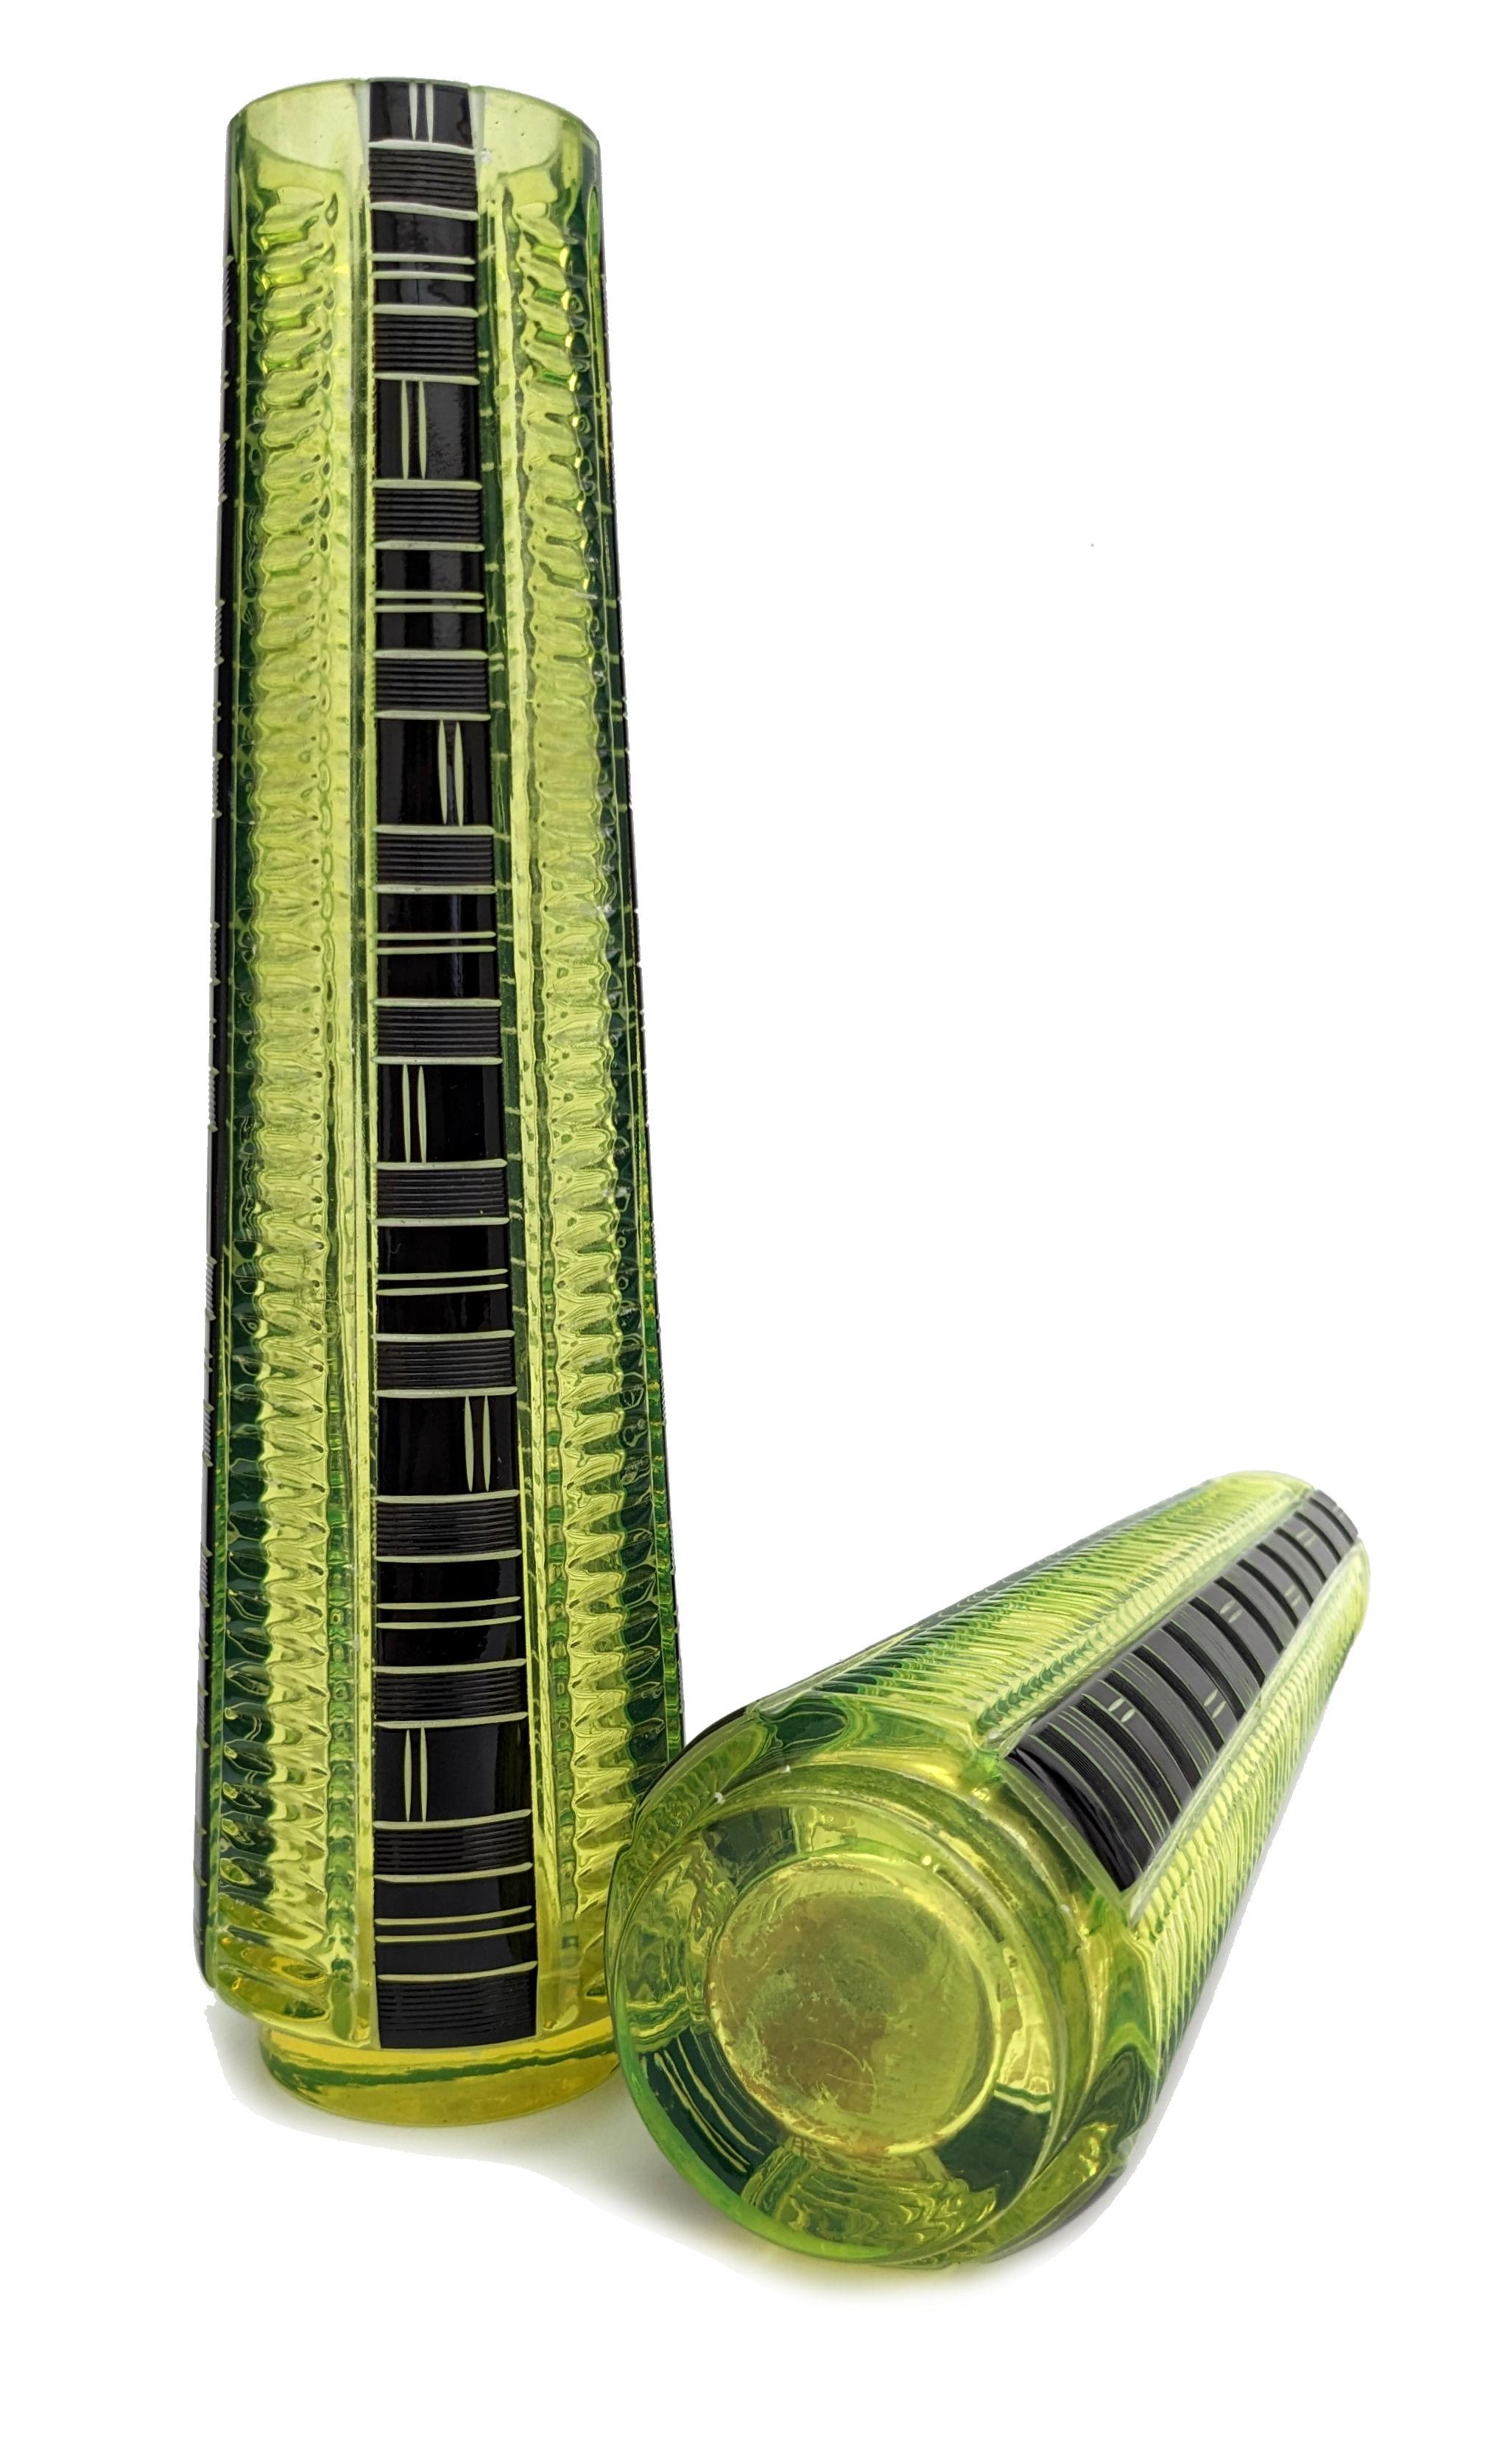 Art Deco Pair Of Tall Uranium Glass Vases By Karl Palda, c1930 For Sale 1